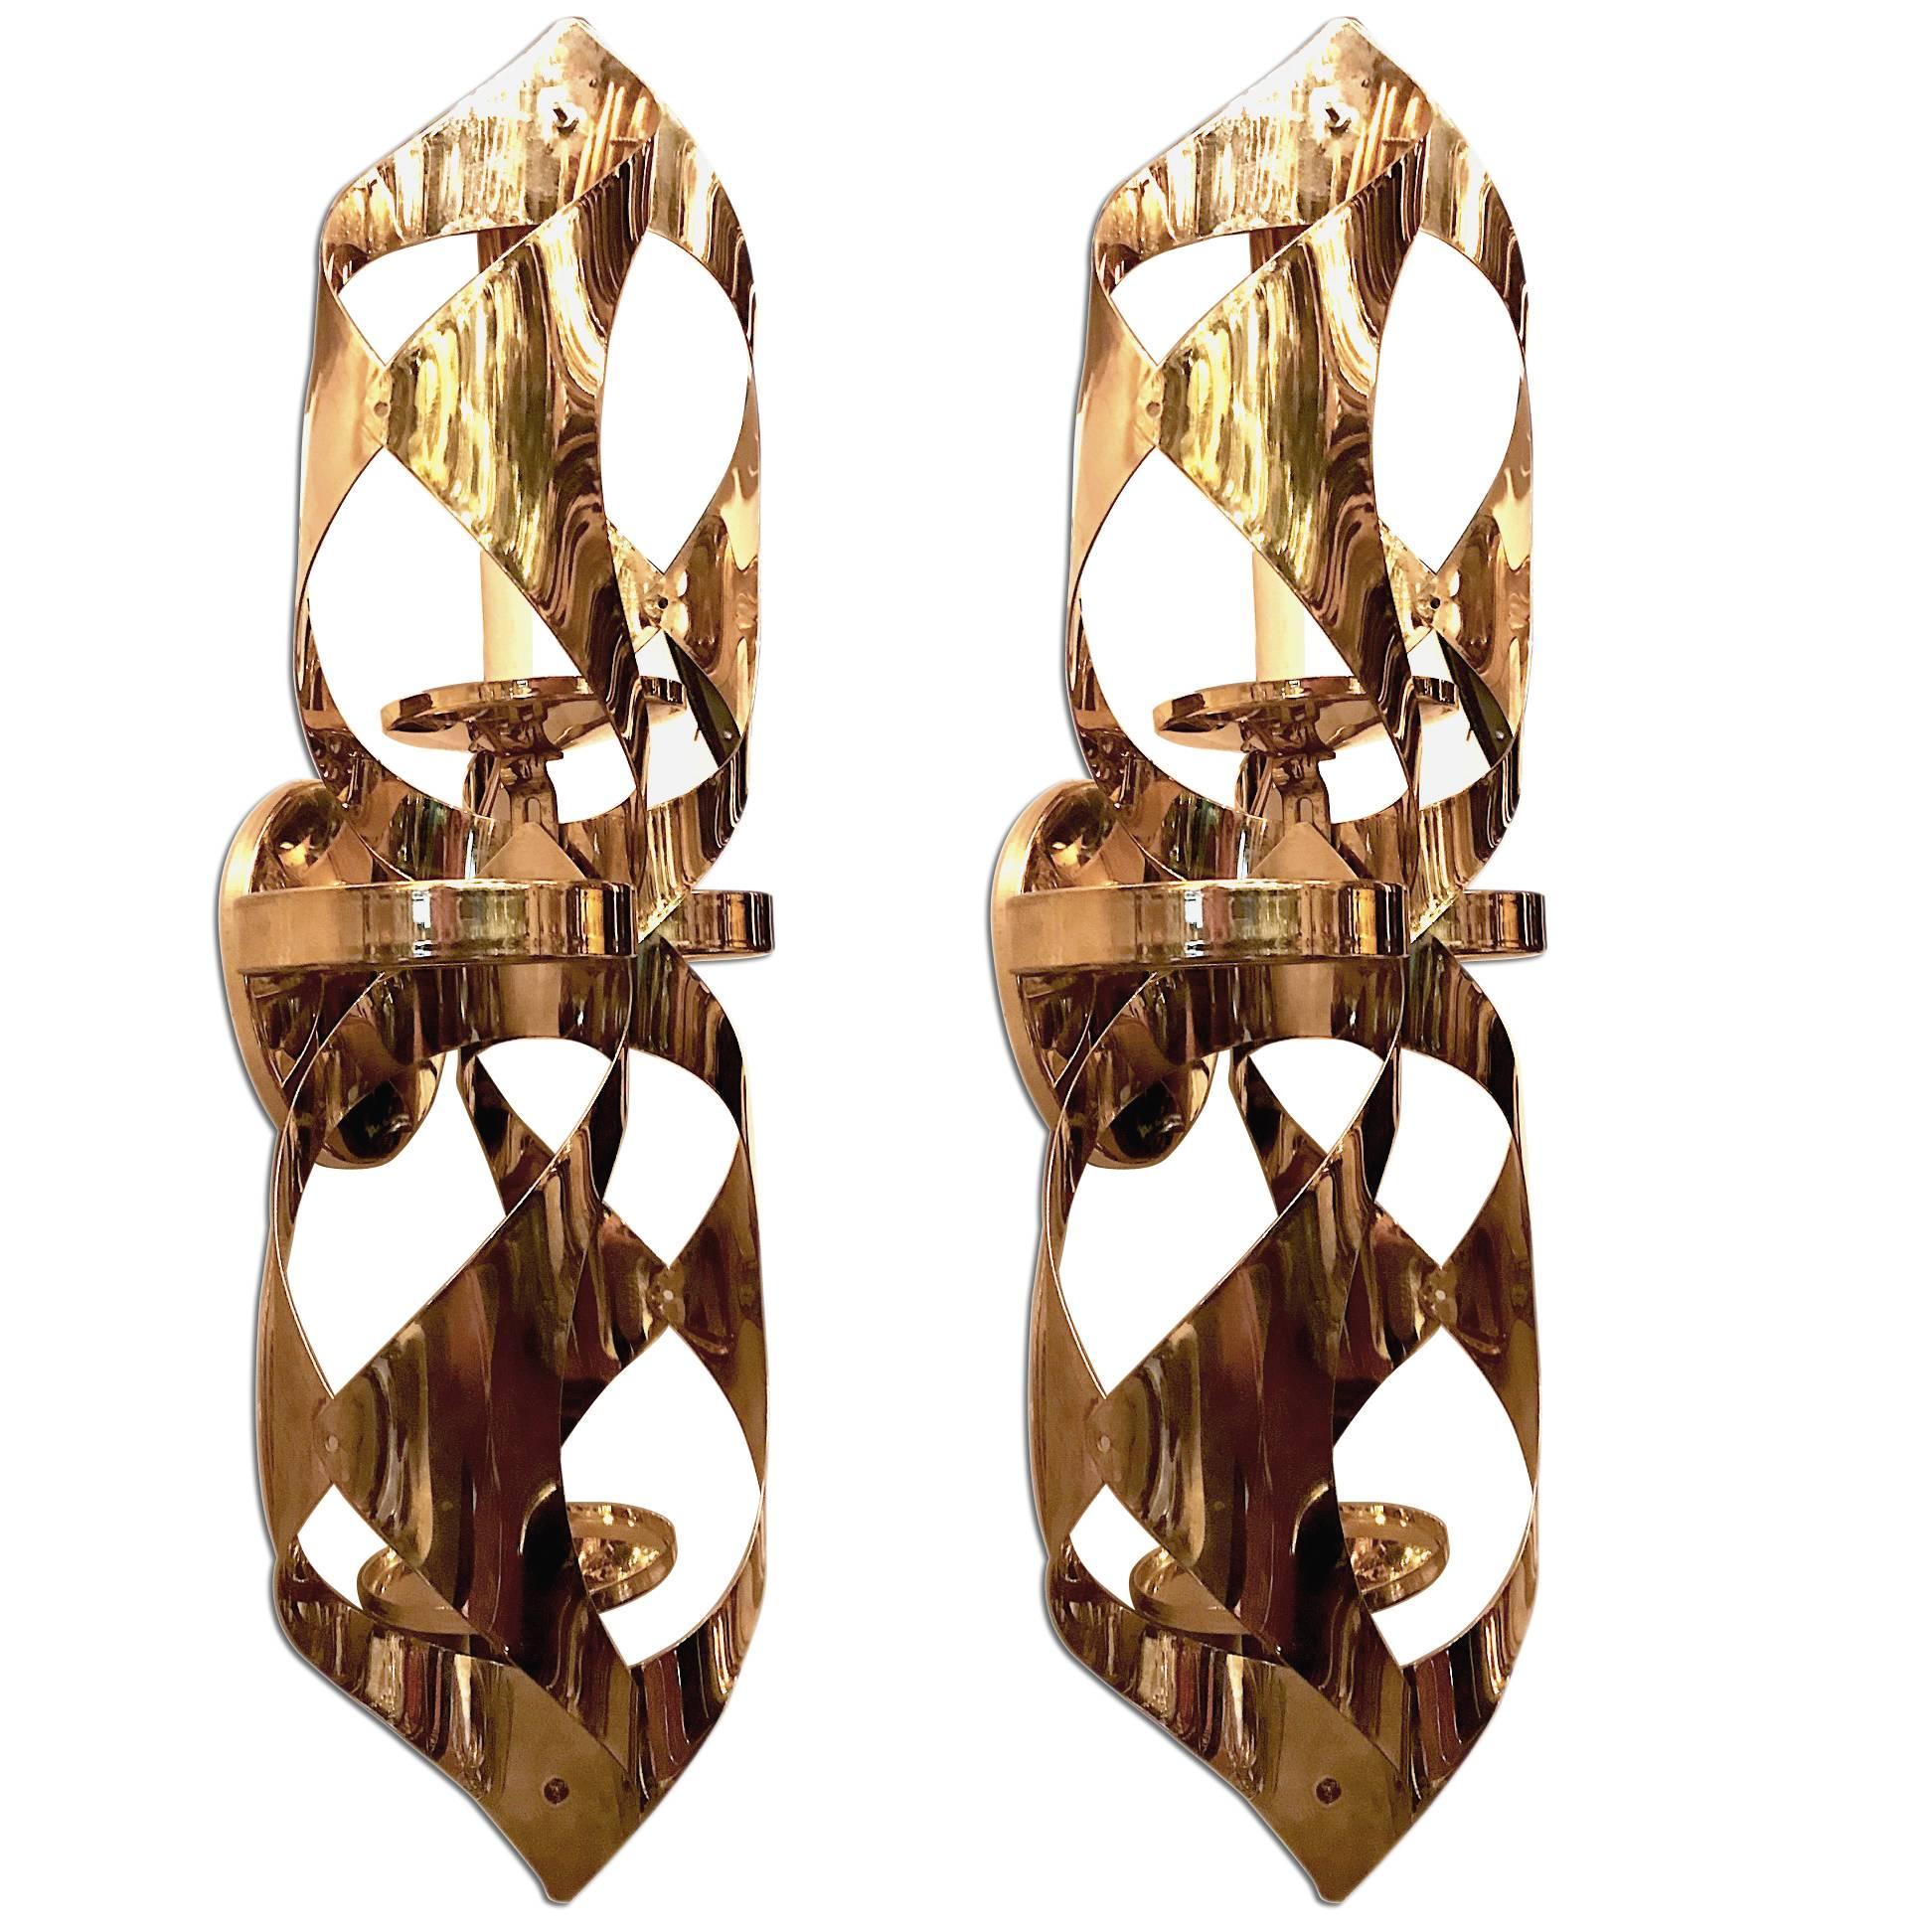 Pair of circa 1960s Italian gilt two-light sconces.

Measurements:
Height 19